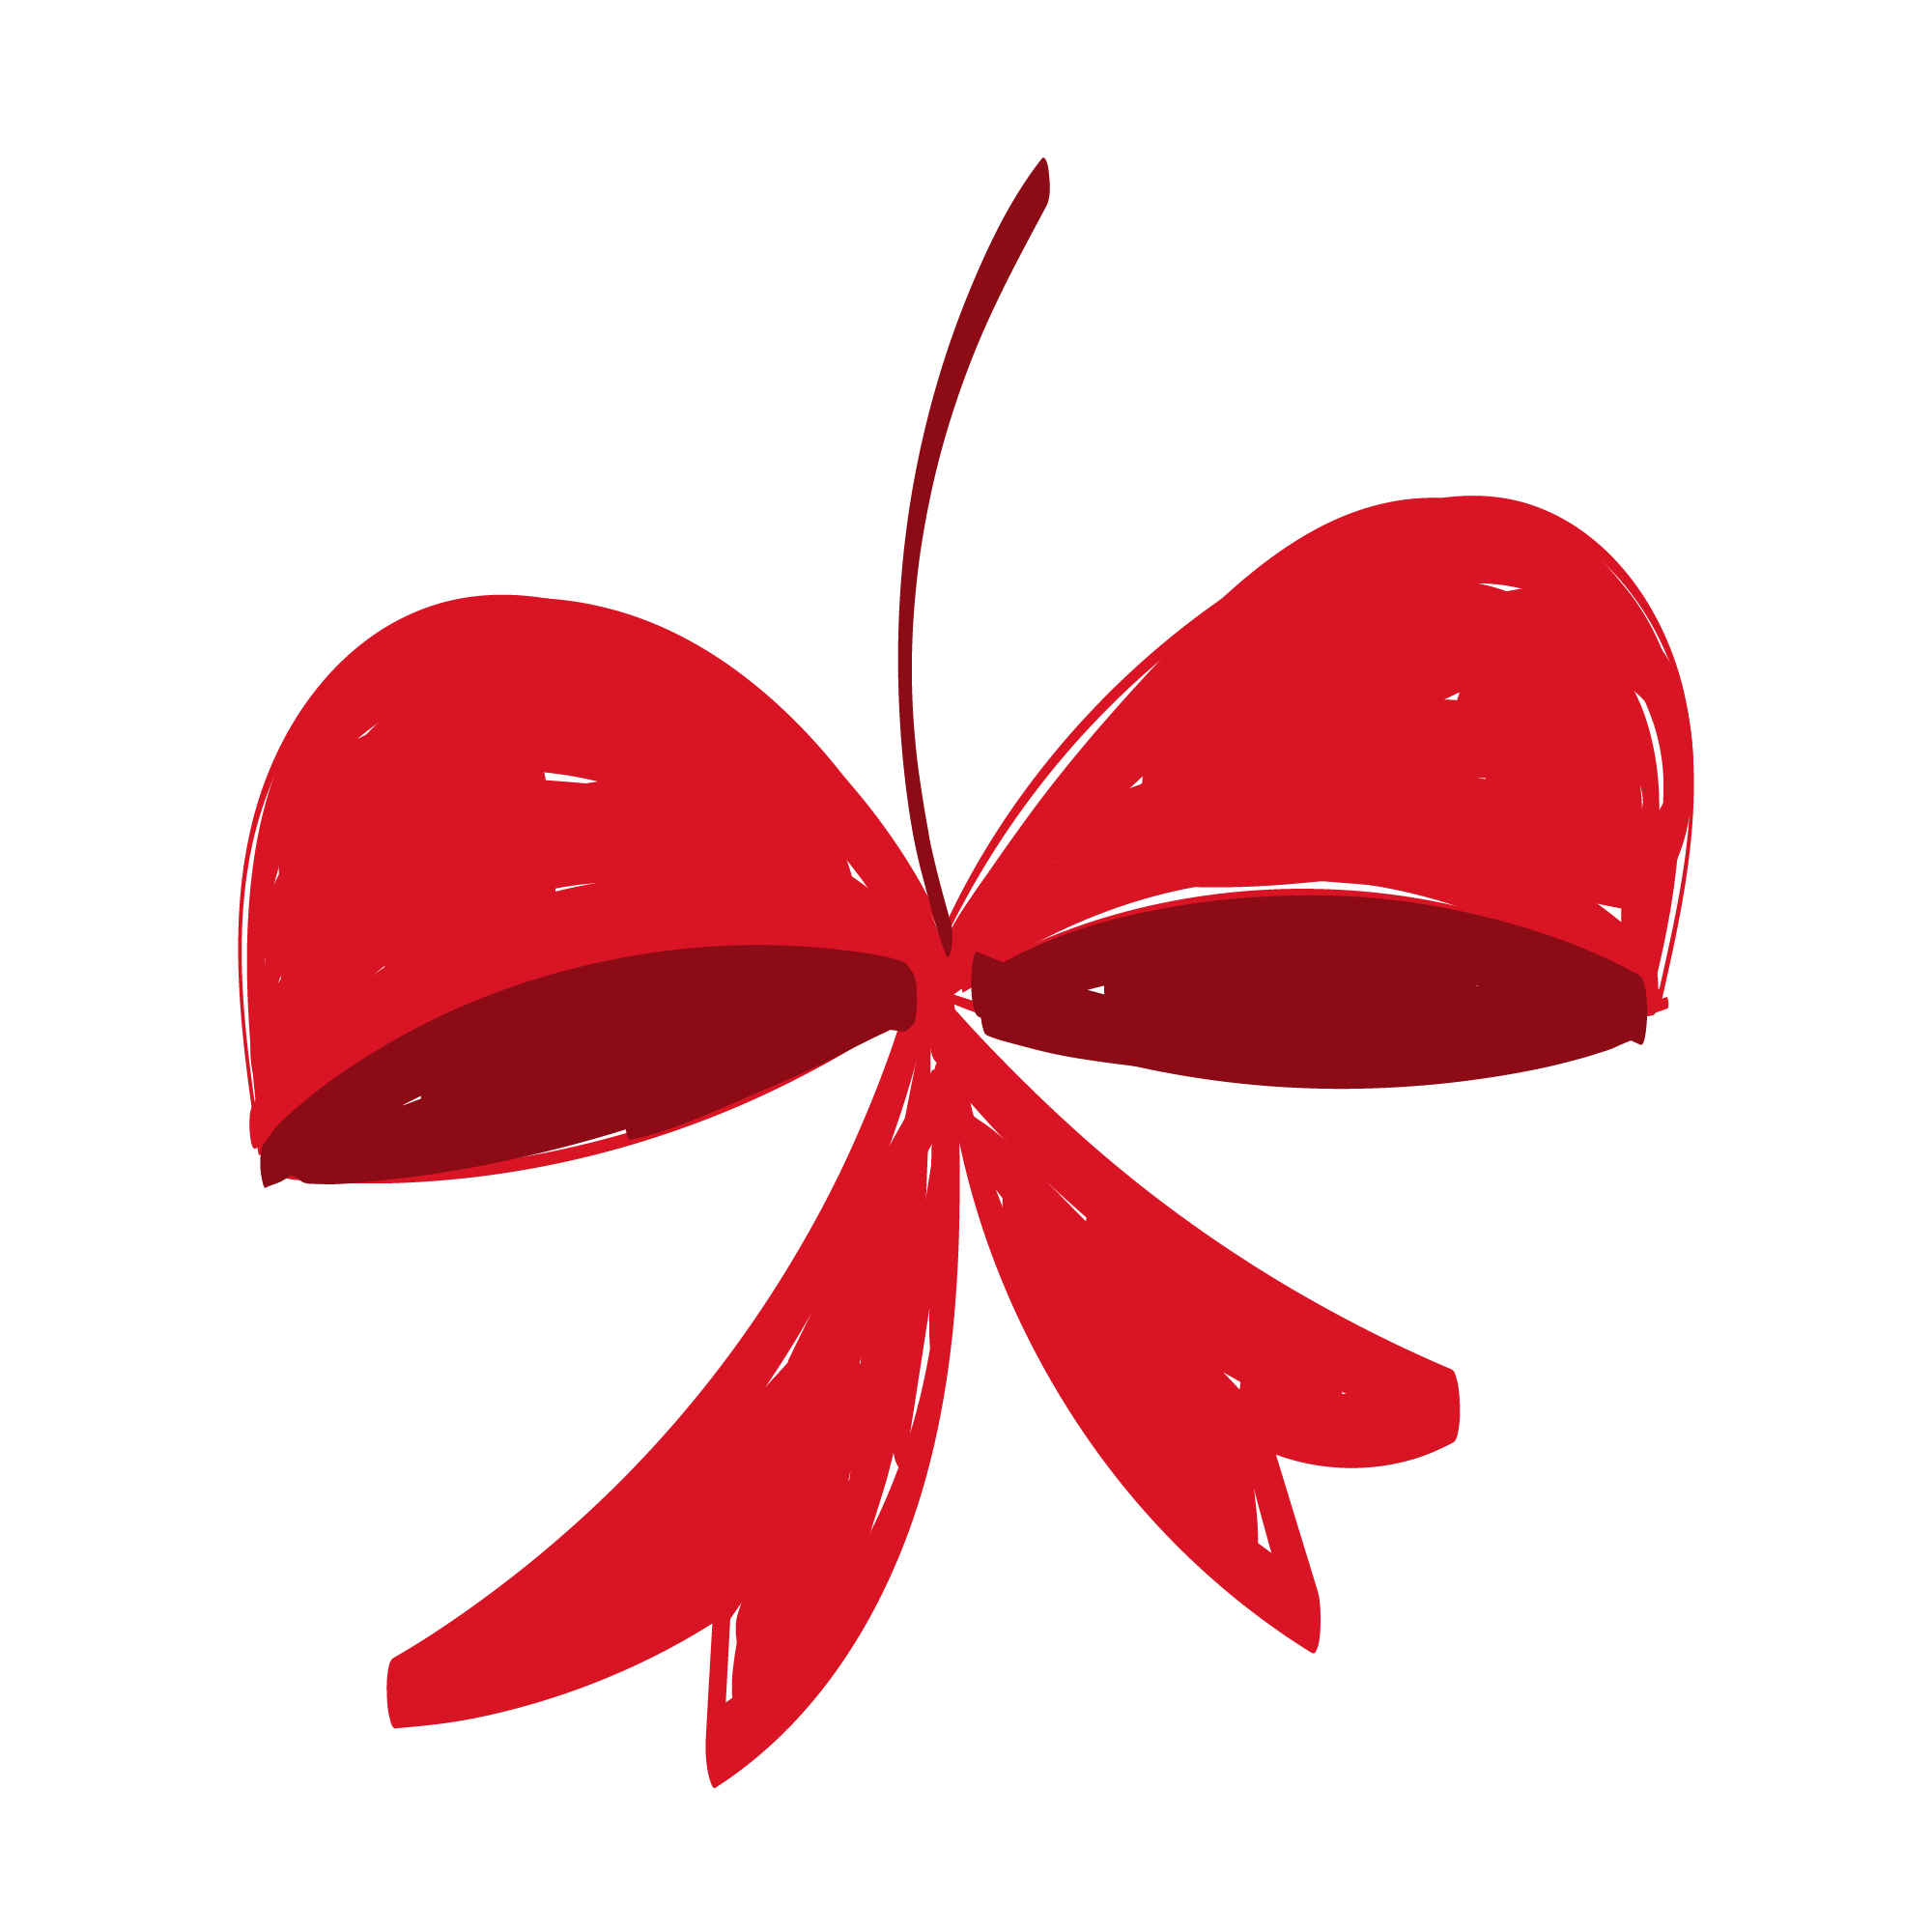 Image with Christmas bow design.